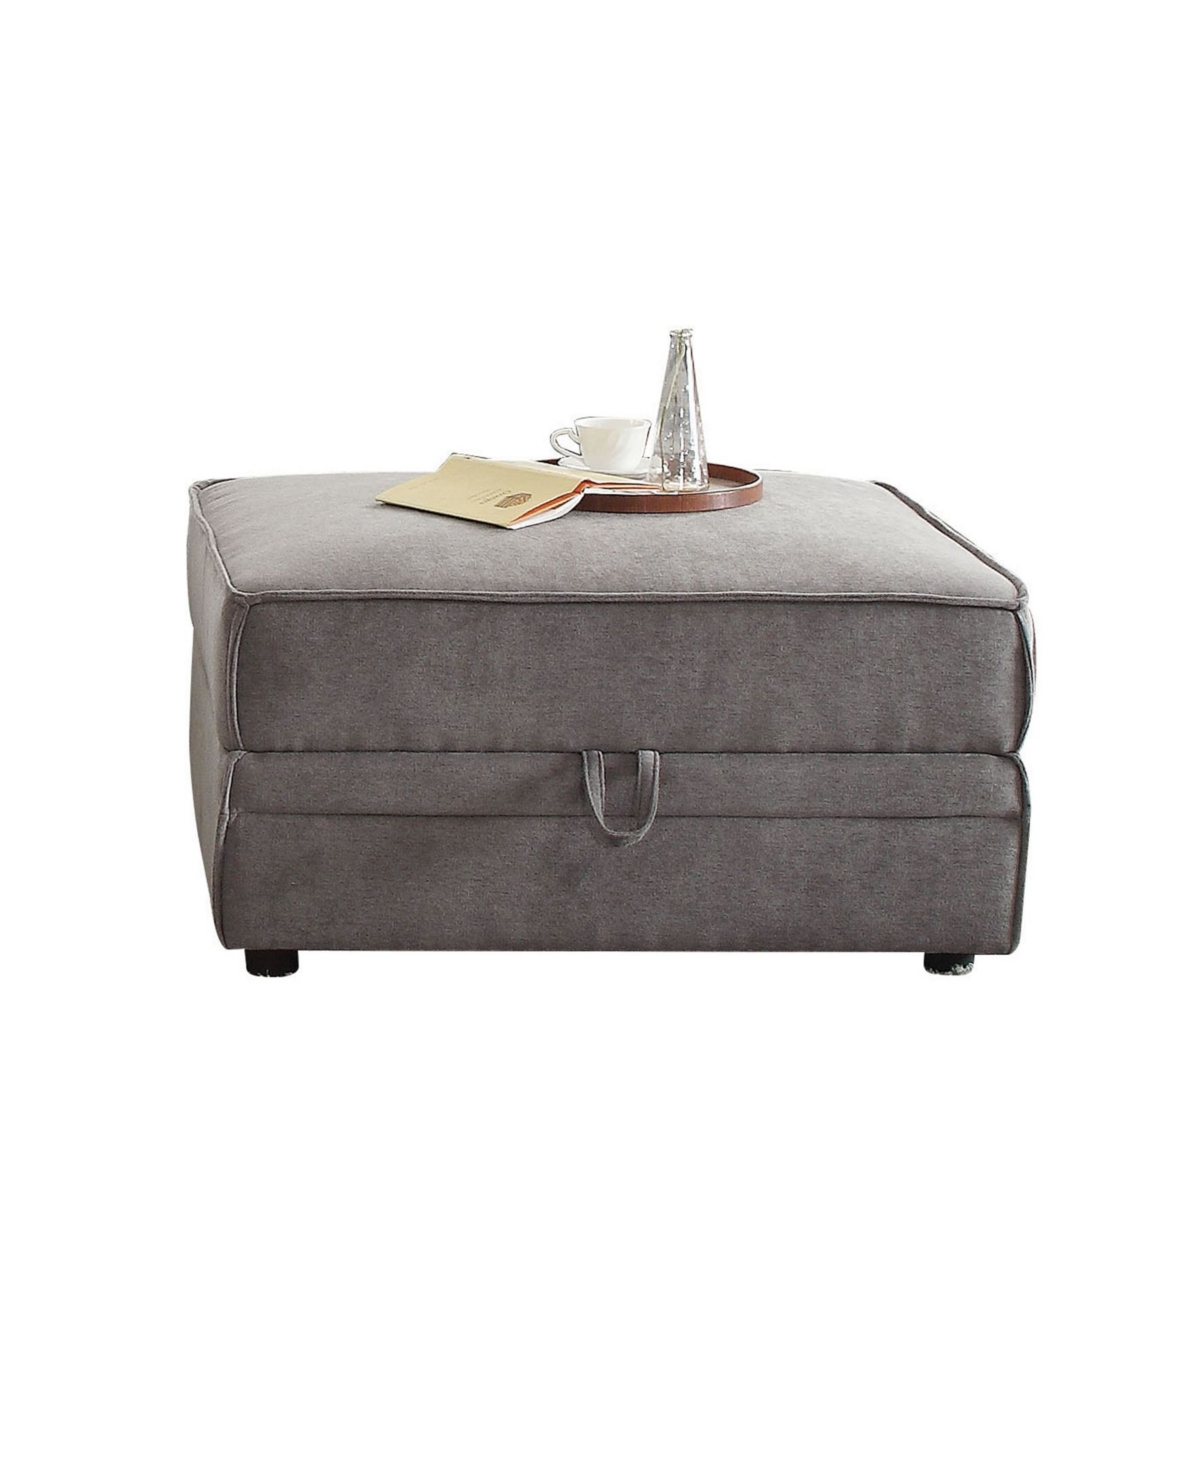 Acme Furniture Bois Ottoman With Storage In Gray